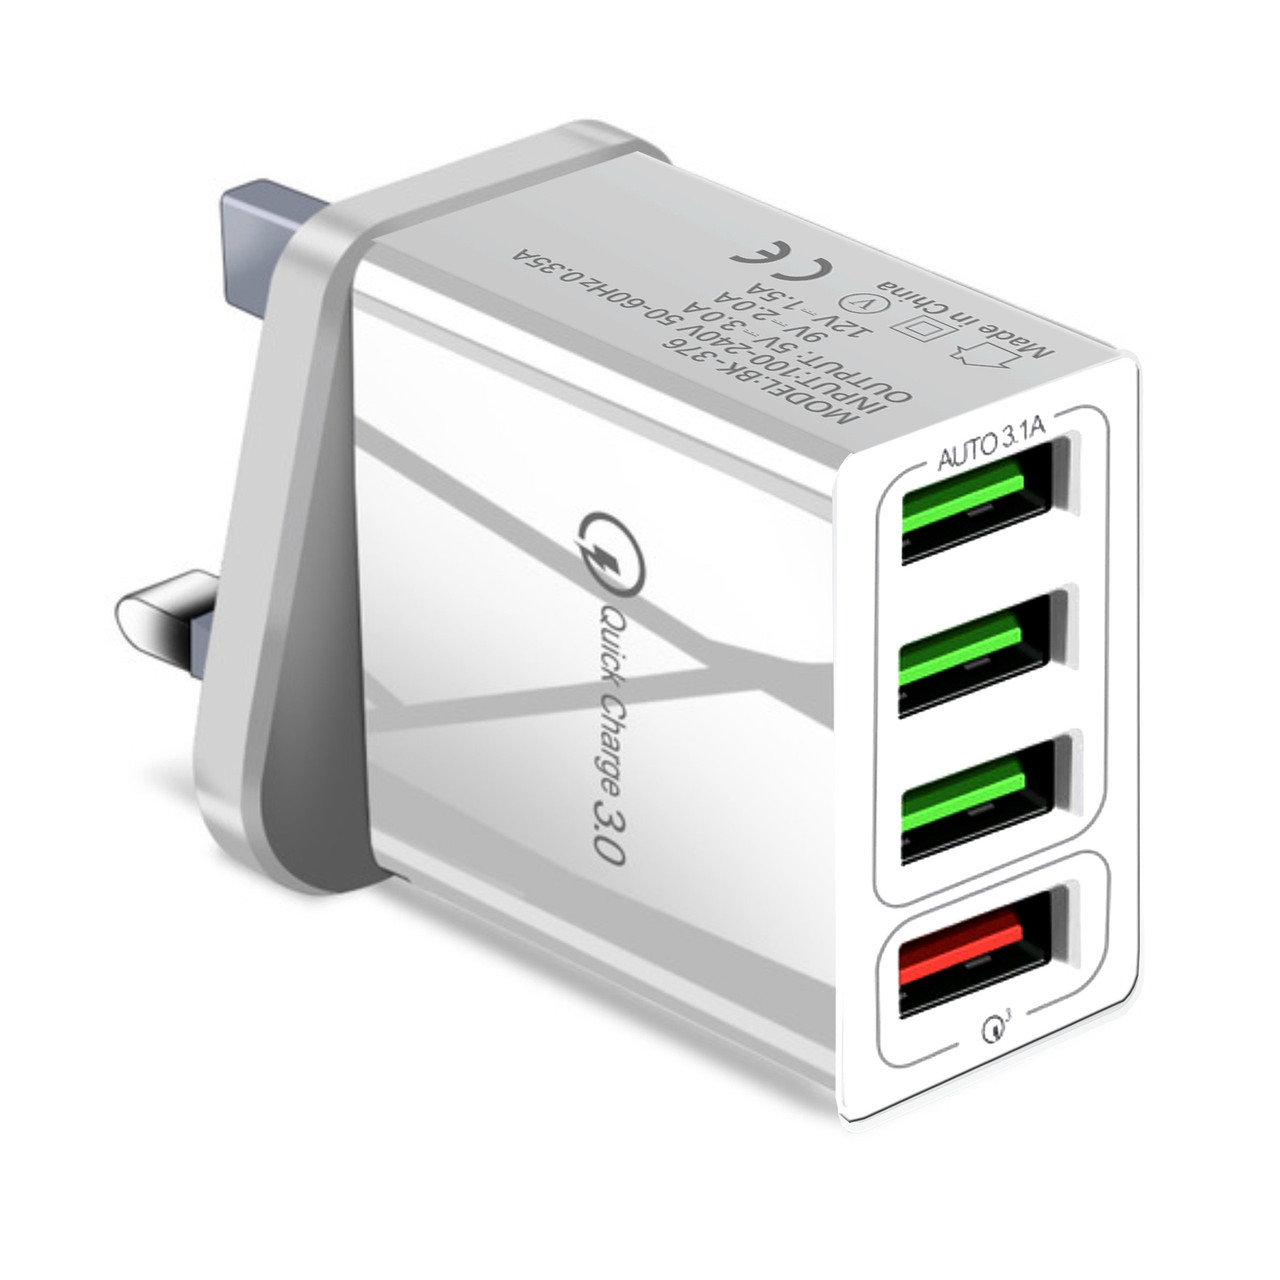 White 4x USB Port Wall Charger with Fast Charge QC 3.0 Port